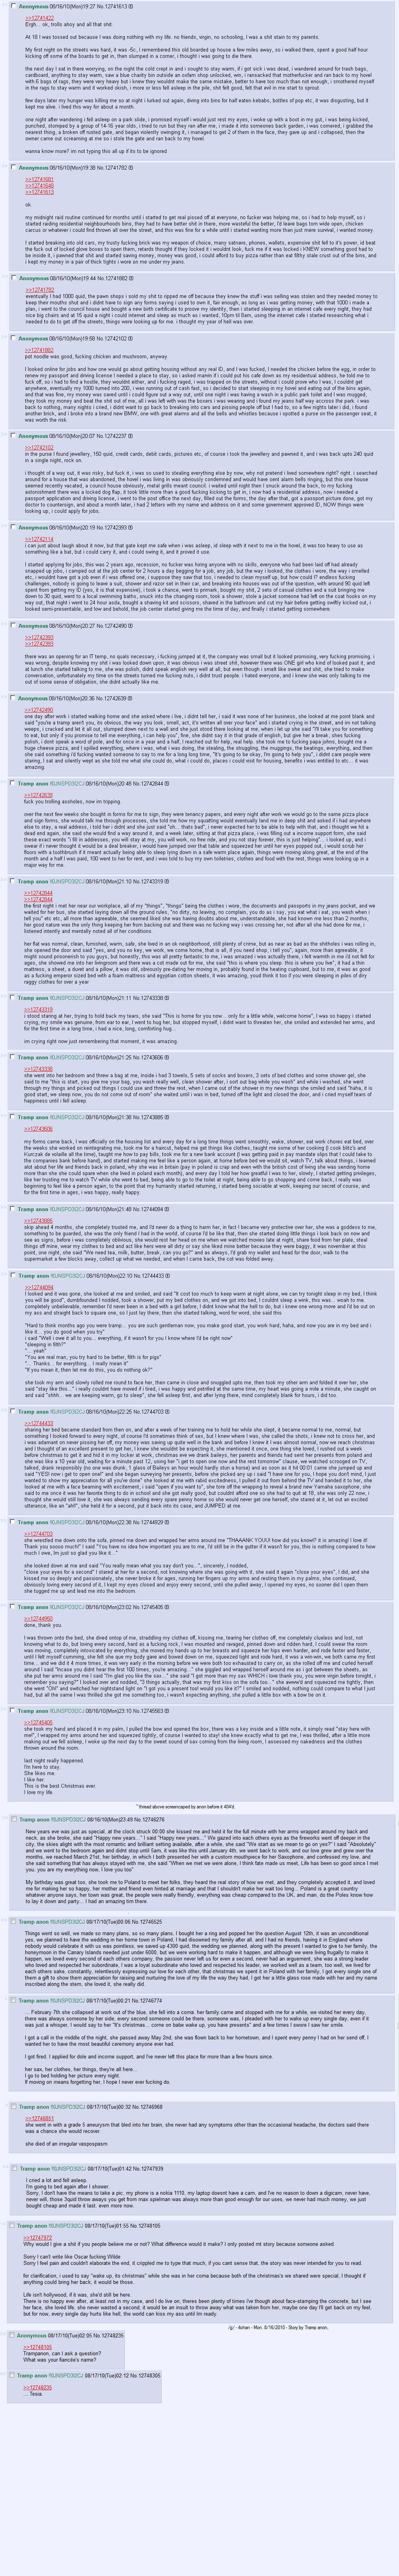 The original posts on 4chan, in image format.